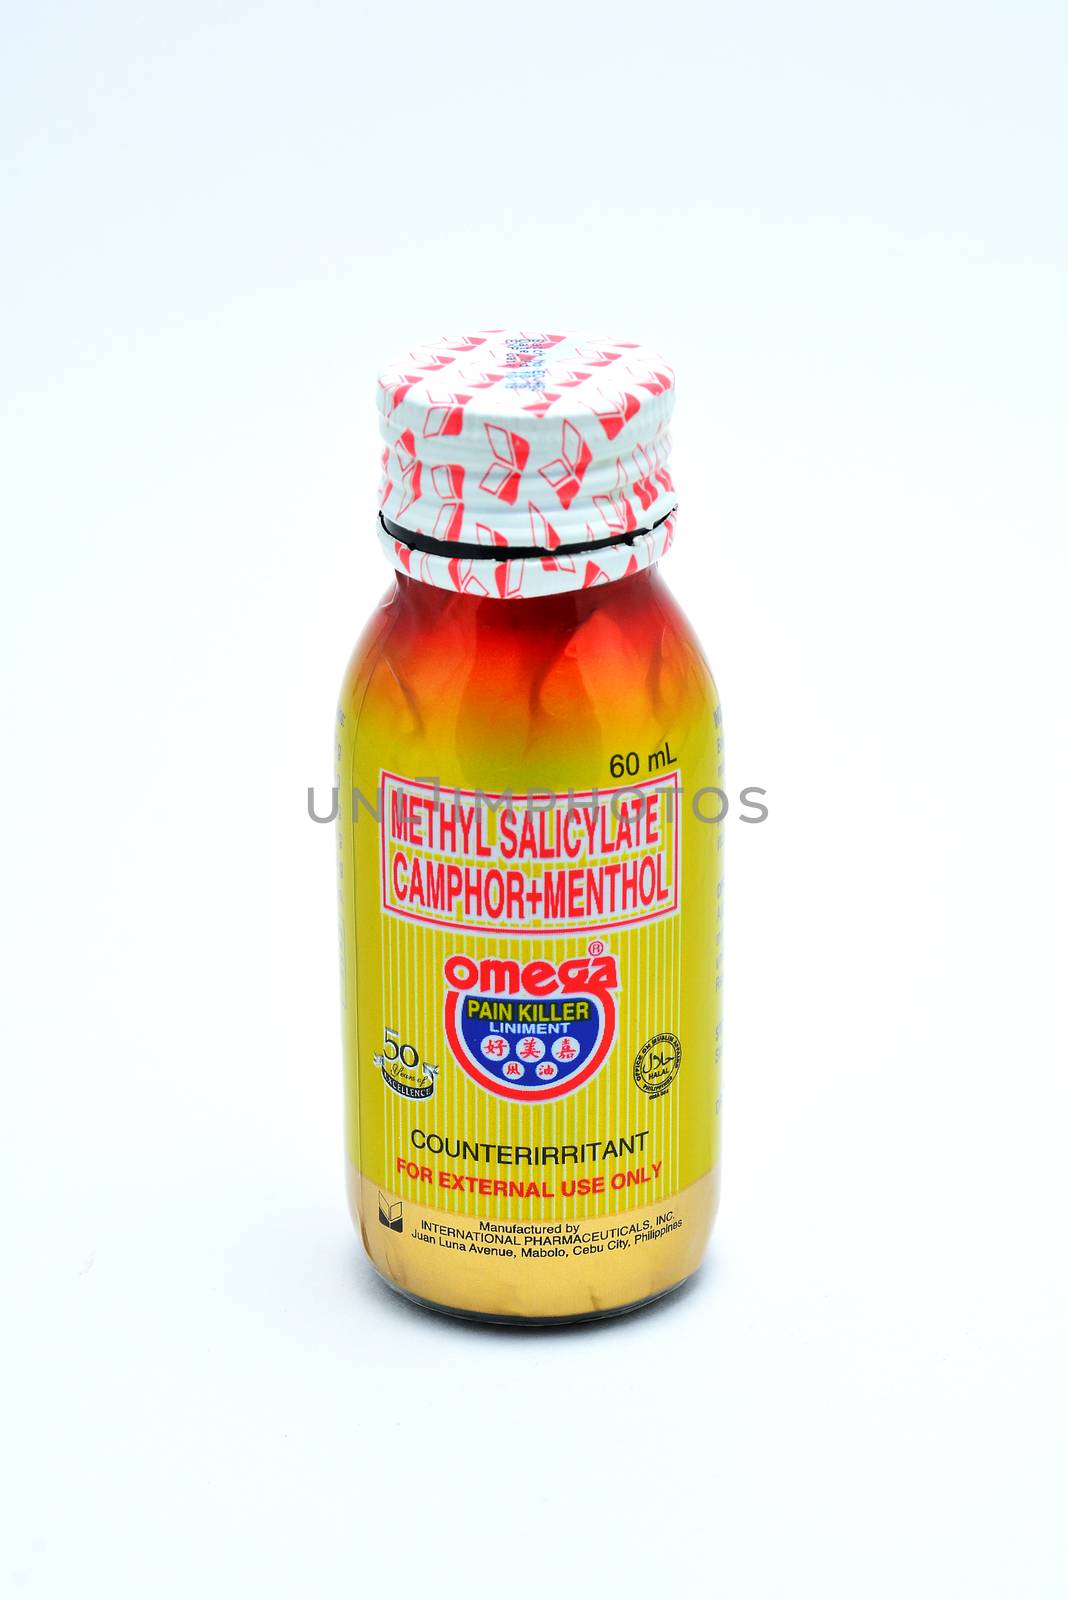 Omega pain killer liniment bottle in Philippines by imwaltersy